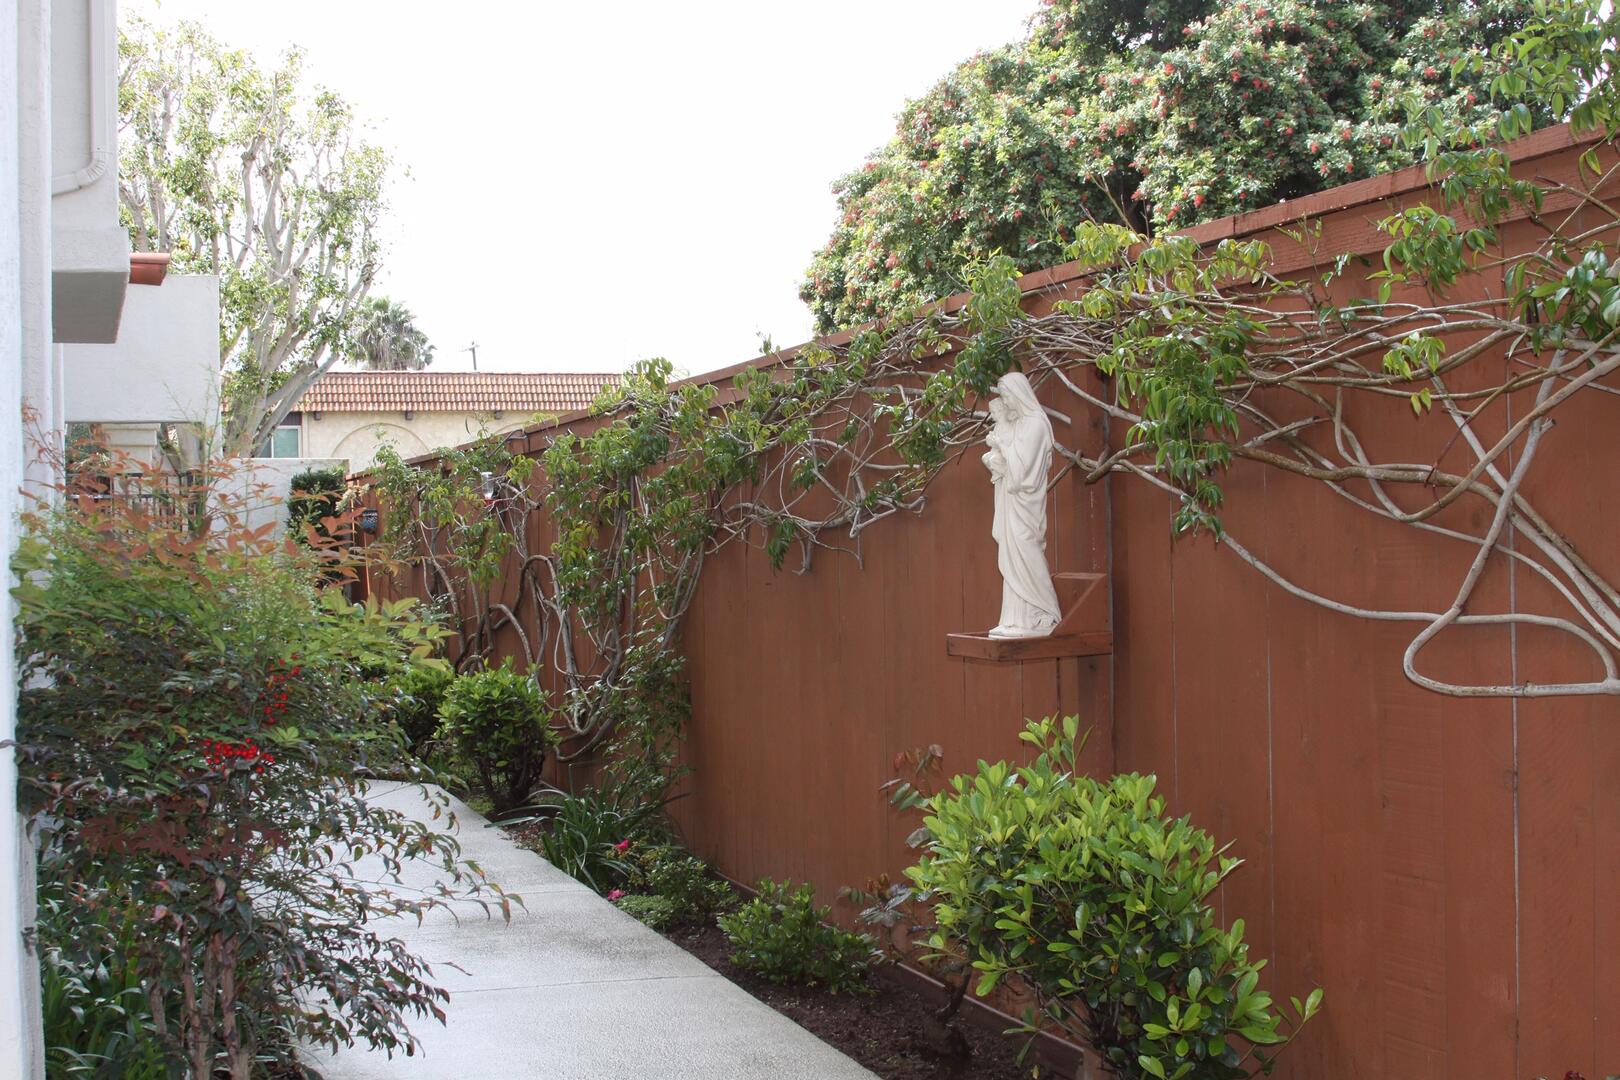 At the Spiritual Ministry Center in the Ocean Beach community of San Diego, every detail of the space has been considered with an eye toward giving retreatants an experience of home (photo: the Spiritual Ministry Center).